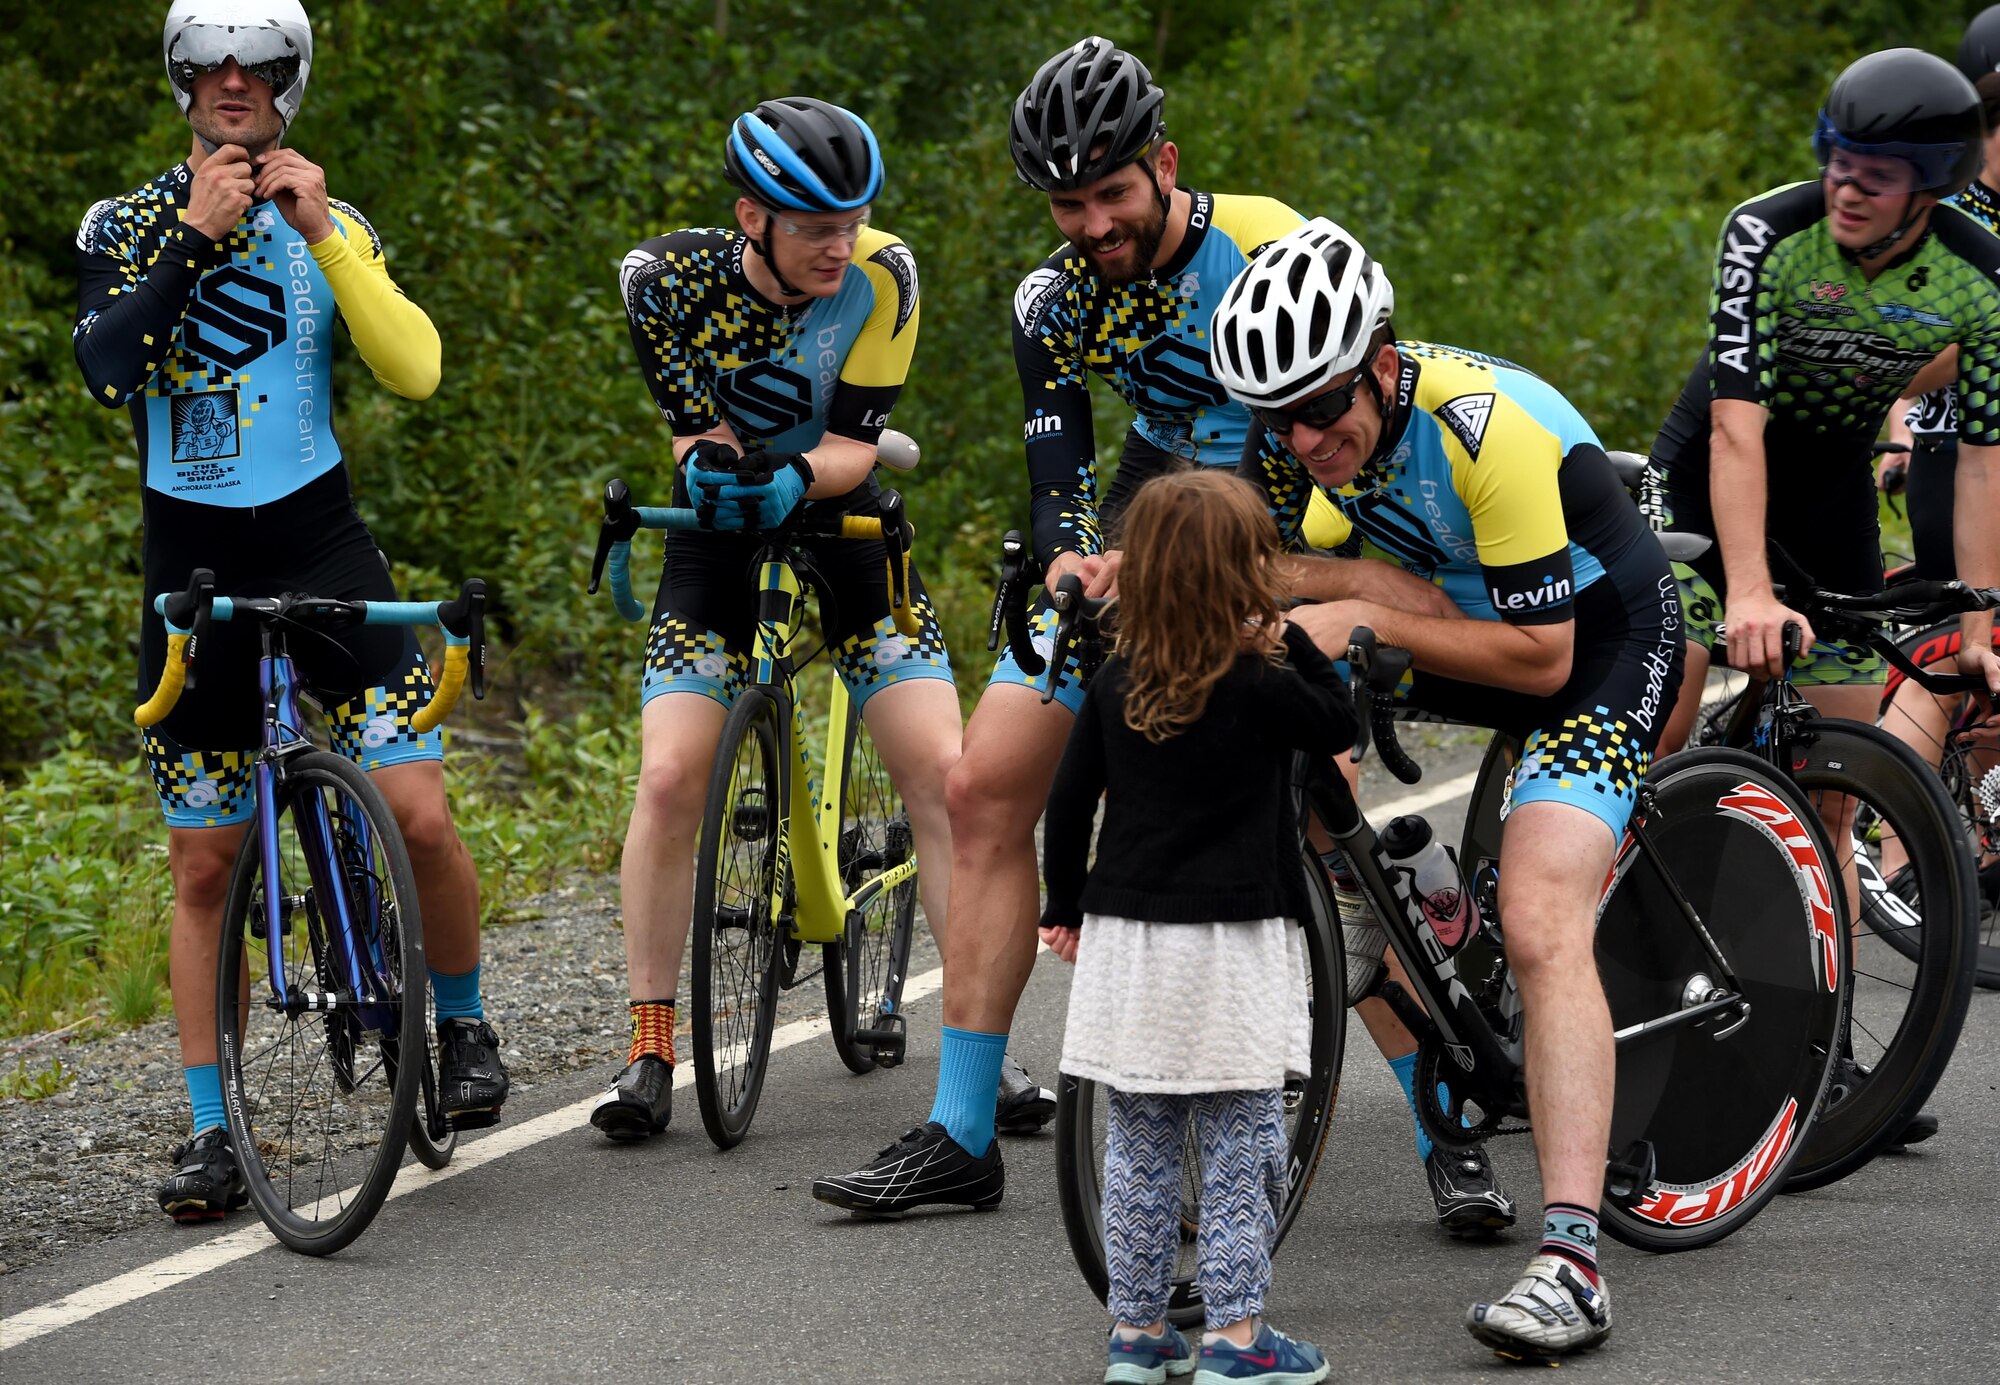 Moose Run time-trial contestants meet with a young spectator following the race at Moose Run Golf Course at Joint Base Elmendorf-Richardson, Alaska, Aug. 3, 2017. For more than 15 years, the club has hosted road race events at JBER.